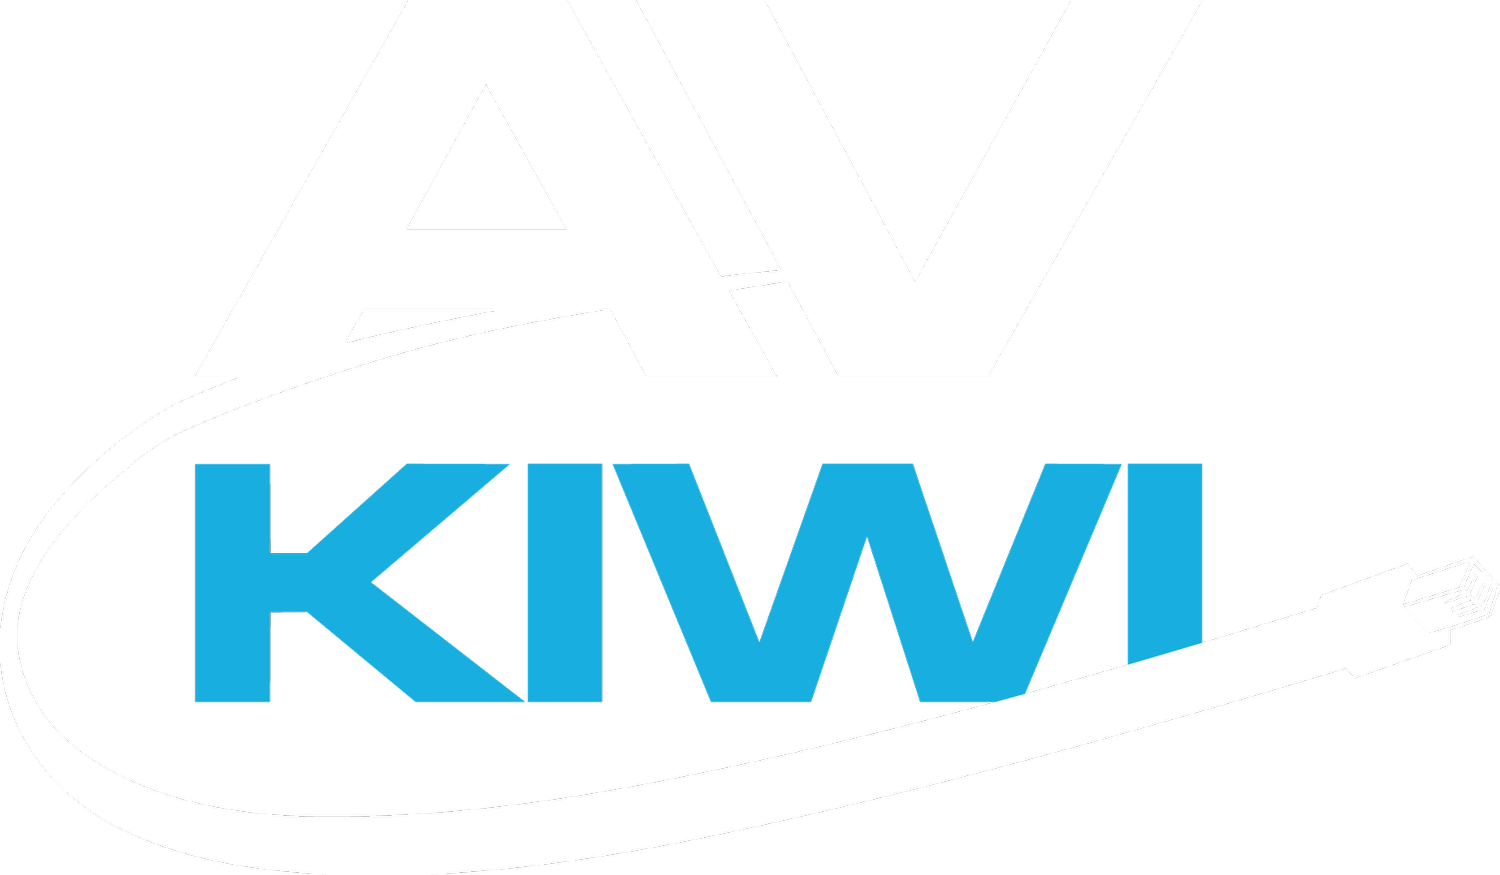 AVKIWI - Security and Data Experts 